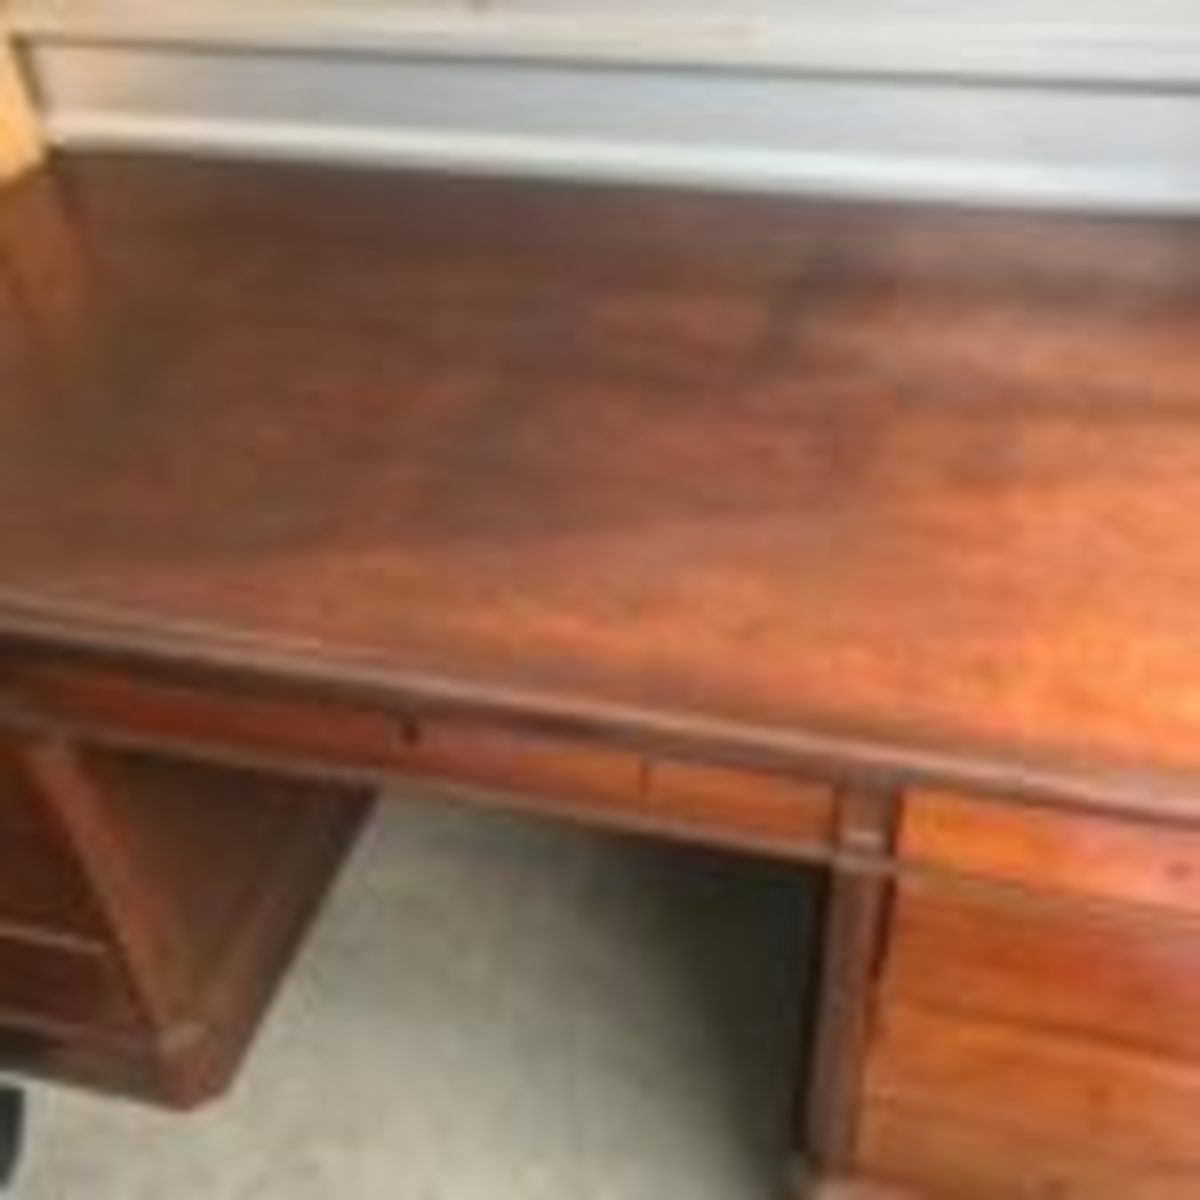 Stow & Davis desk submitted for appraisal